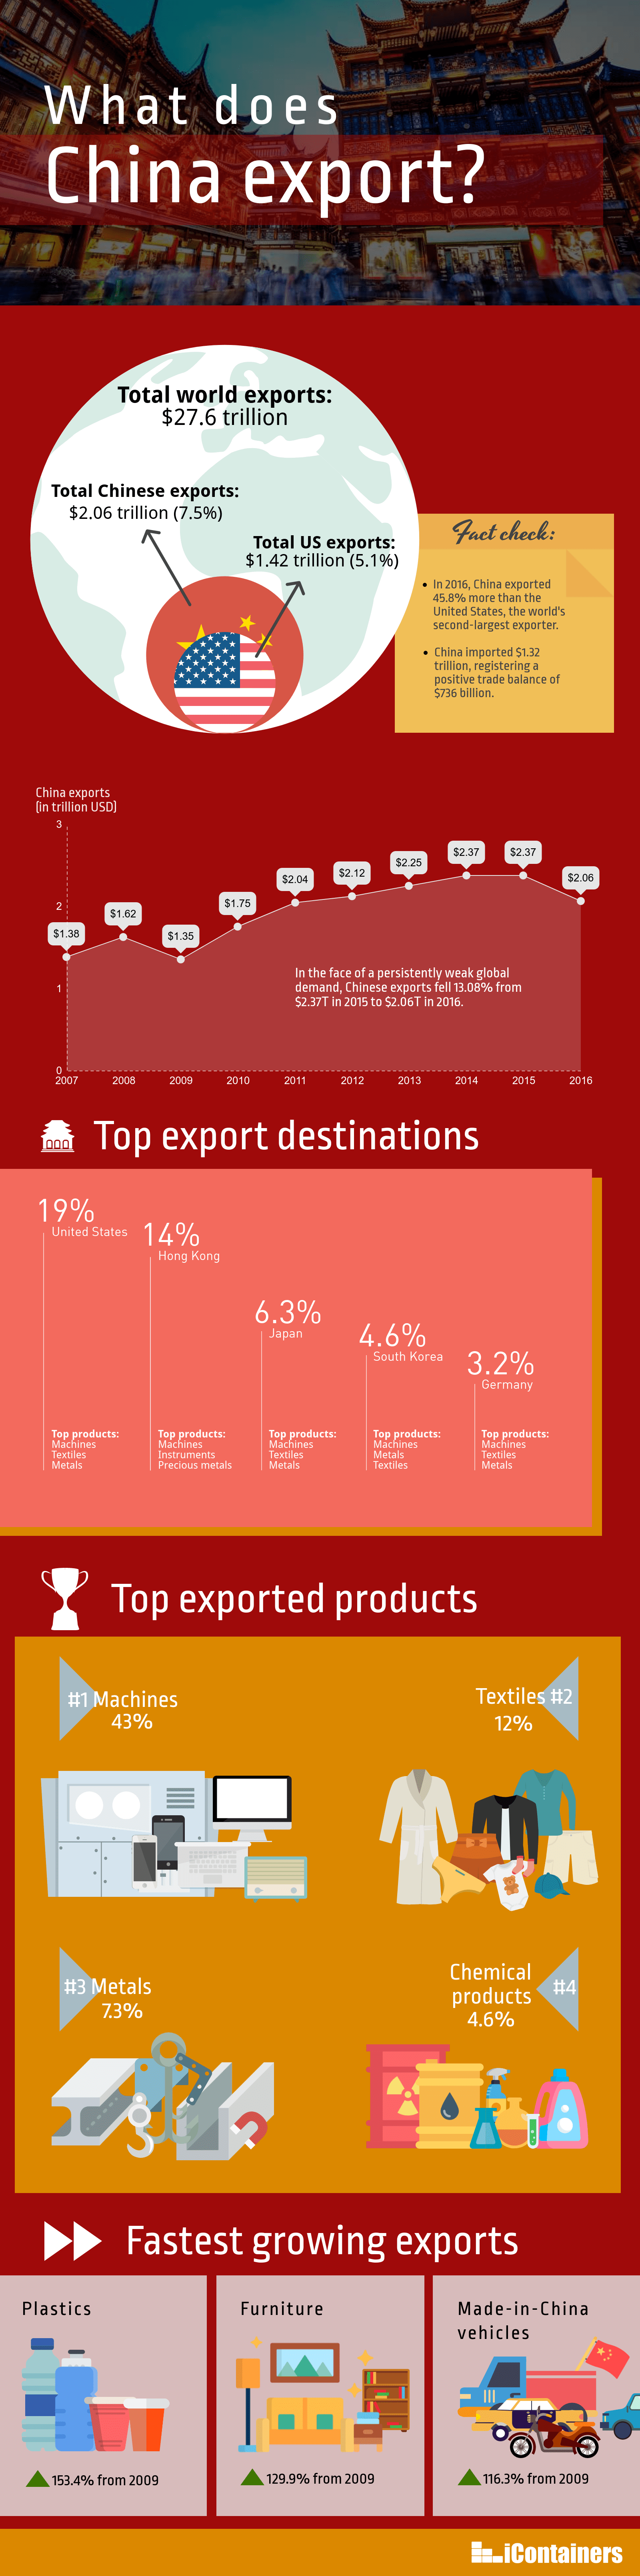 what-does-china-export-infographic.png